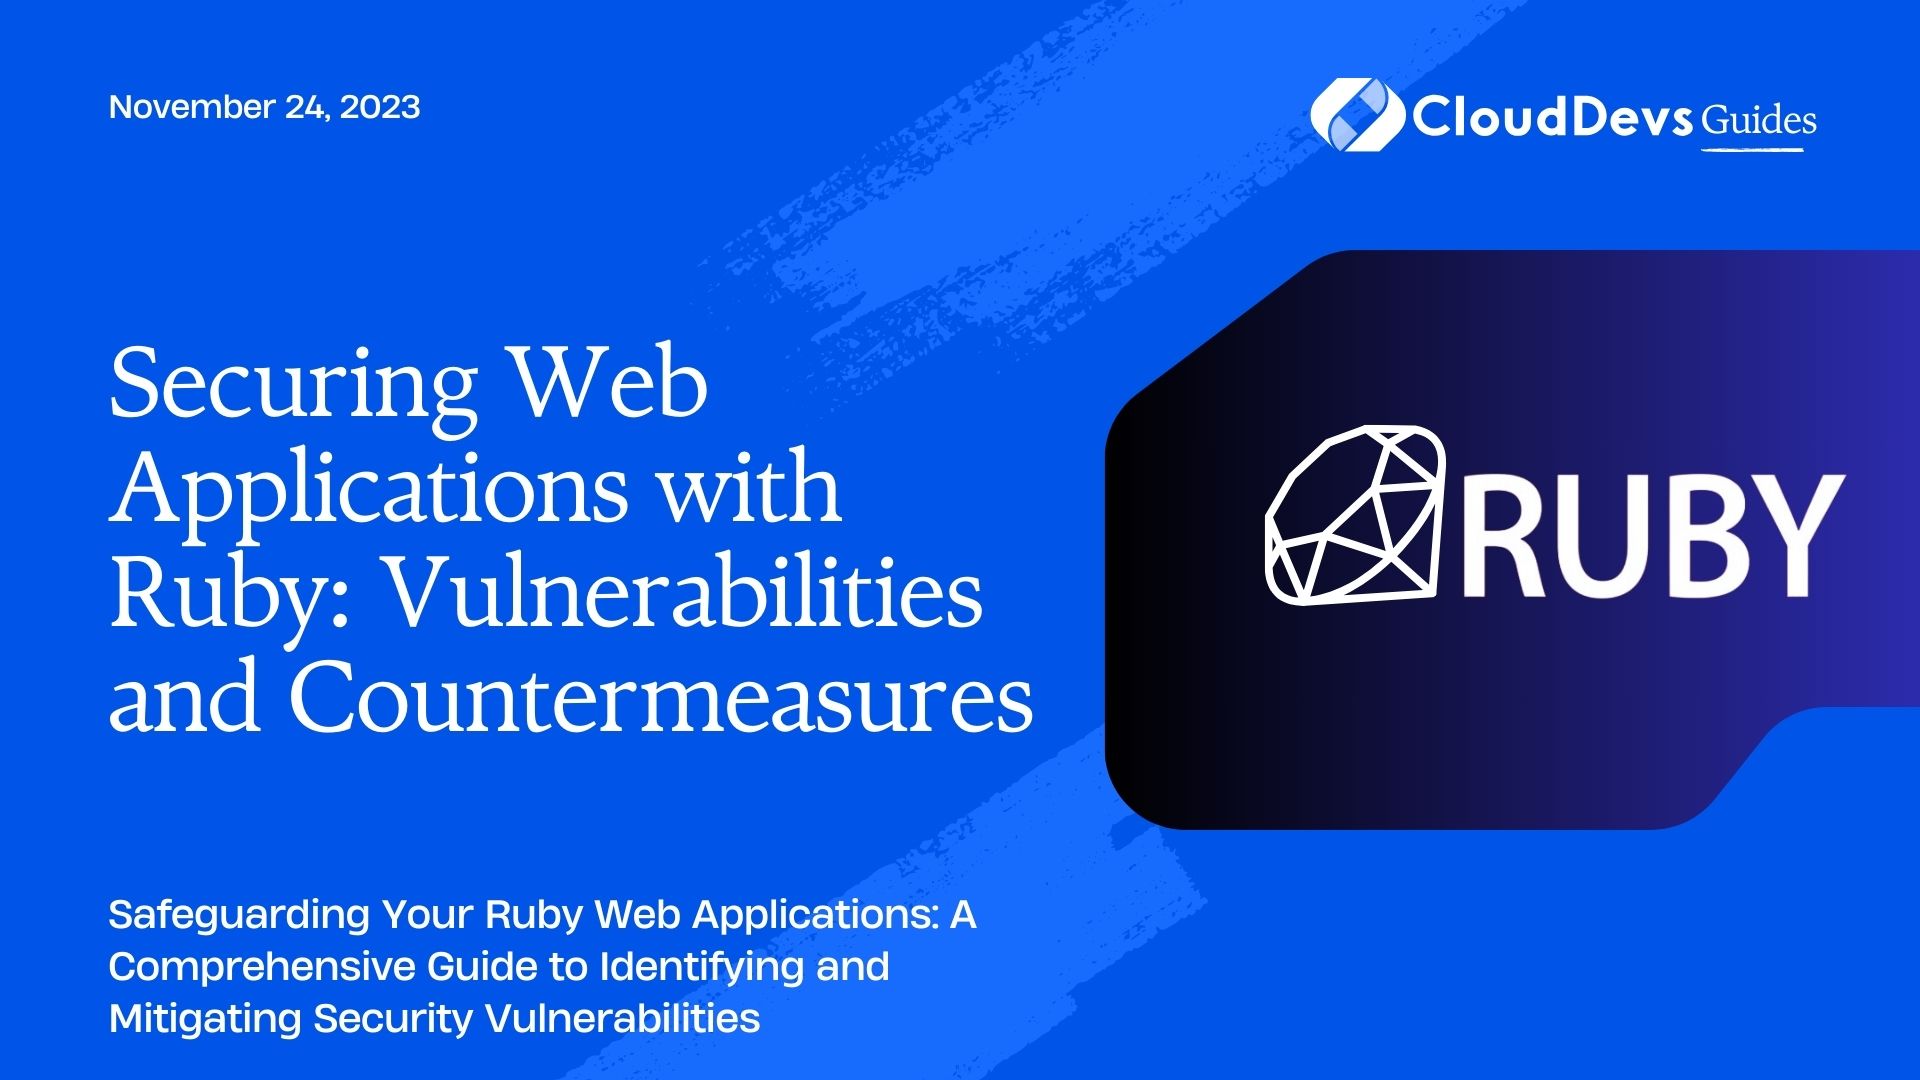 Securing Web Applications with Ruby: Vulnerabilities and Countermeasures